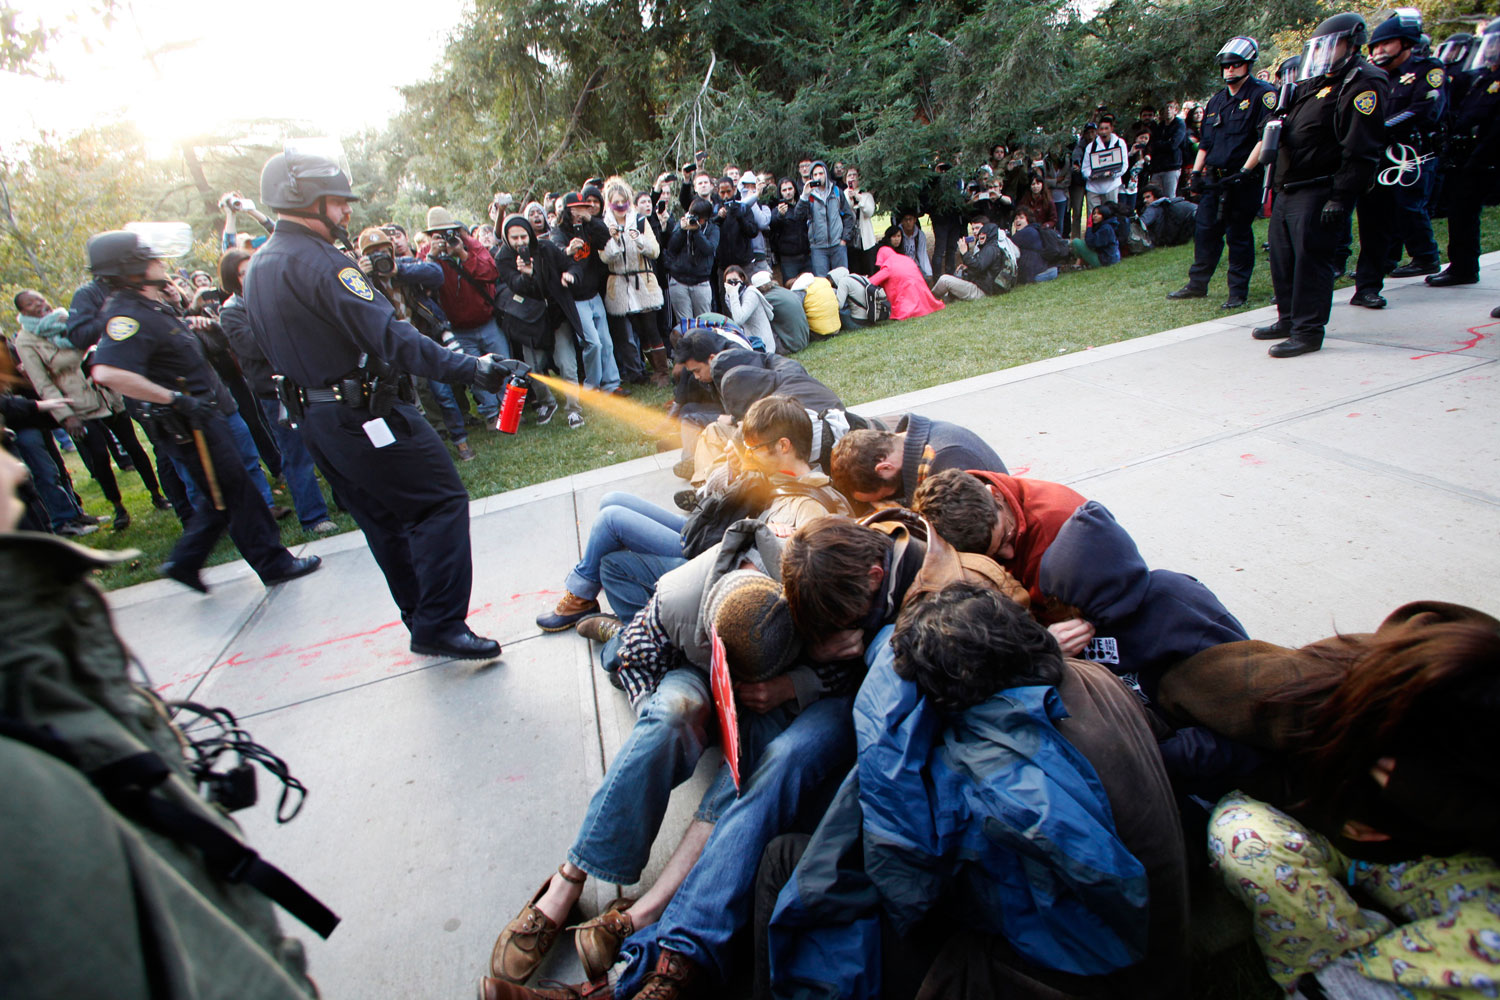 November 18, 2011. University of California, Davis Police Lt. John Pike uses pepper spray to move Occupy UC Davis protesters while blocking their exit from the school's quad Friday in Davis, Calif. Two University of California, Davis police officers involved in pepper spraying seated protesters were placed on administrative leave November 20, 2011, as the chancellor of the school accelerates the investigation into the incident.